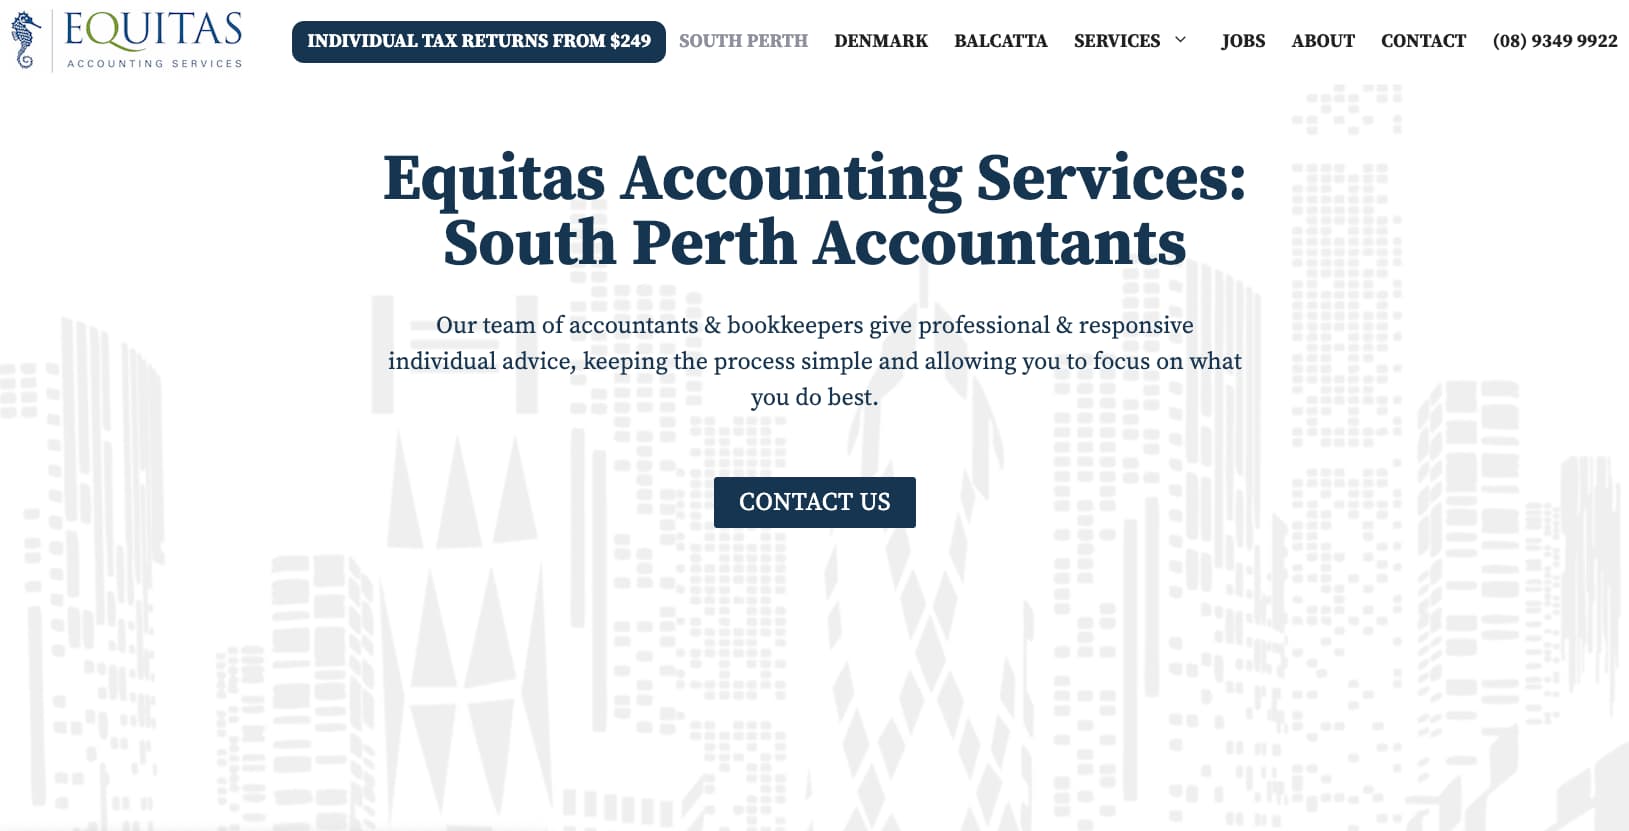 Equitas Accounting Services South Perth Accountants